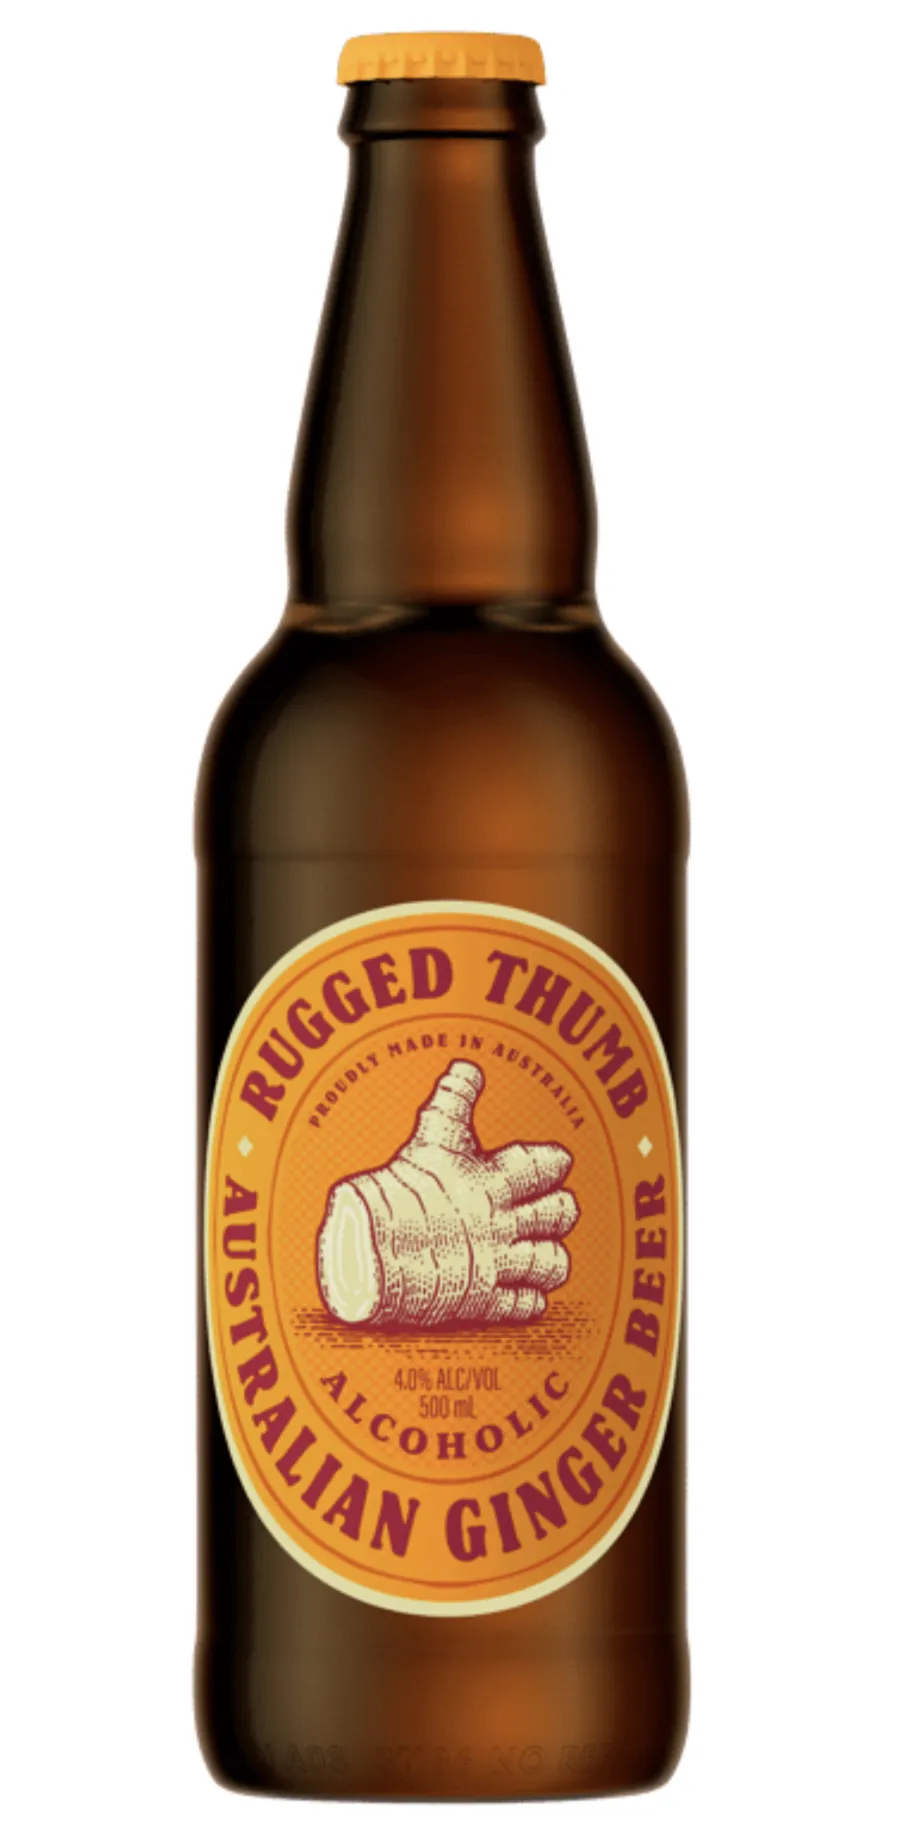 Image - Australian Ginger Beer by Rugged Thumb